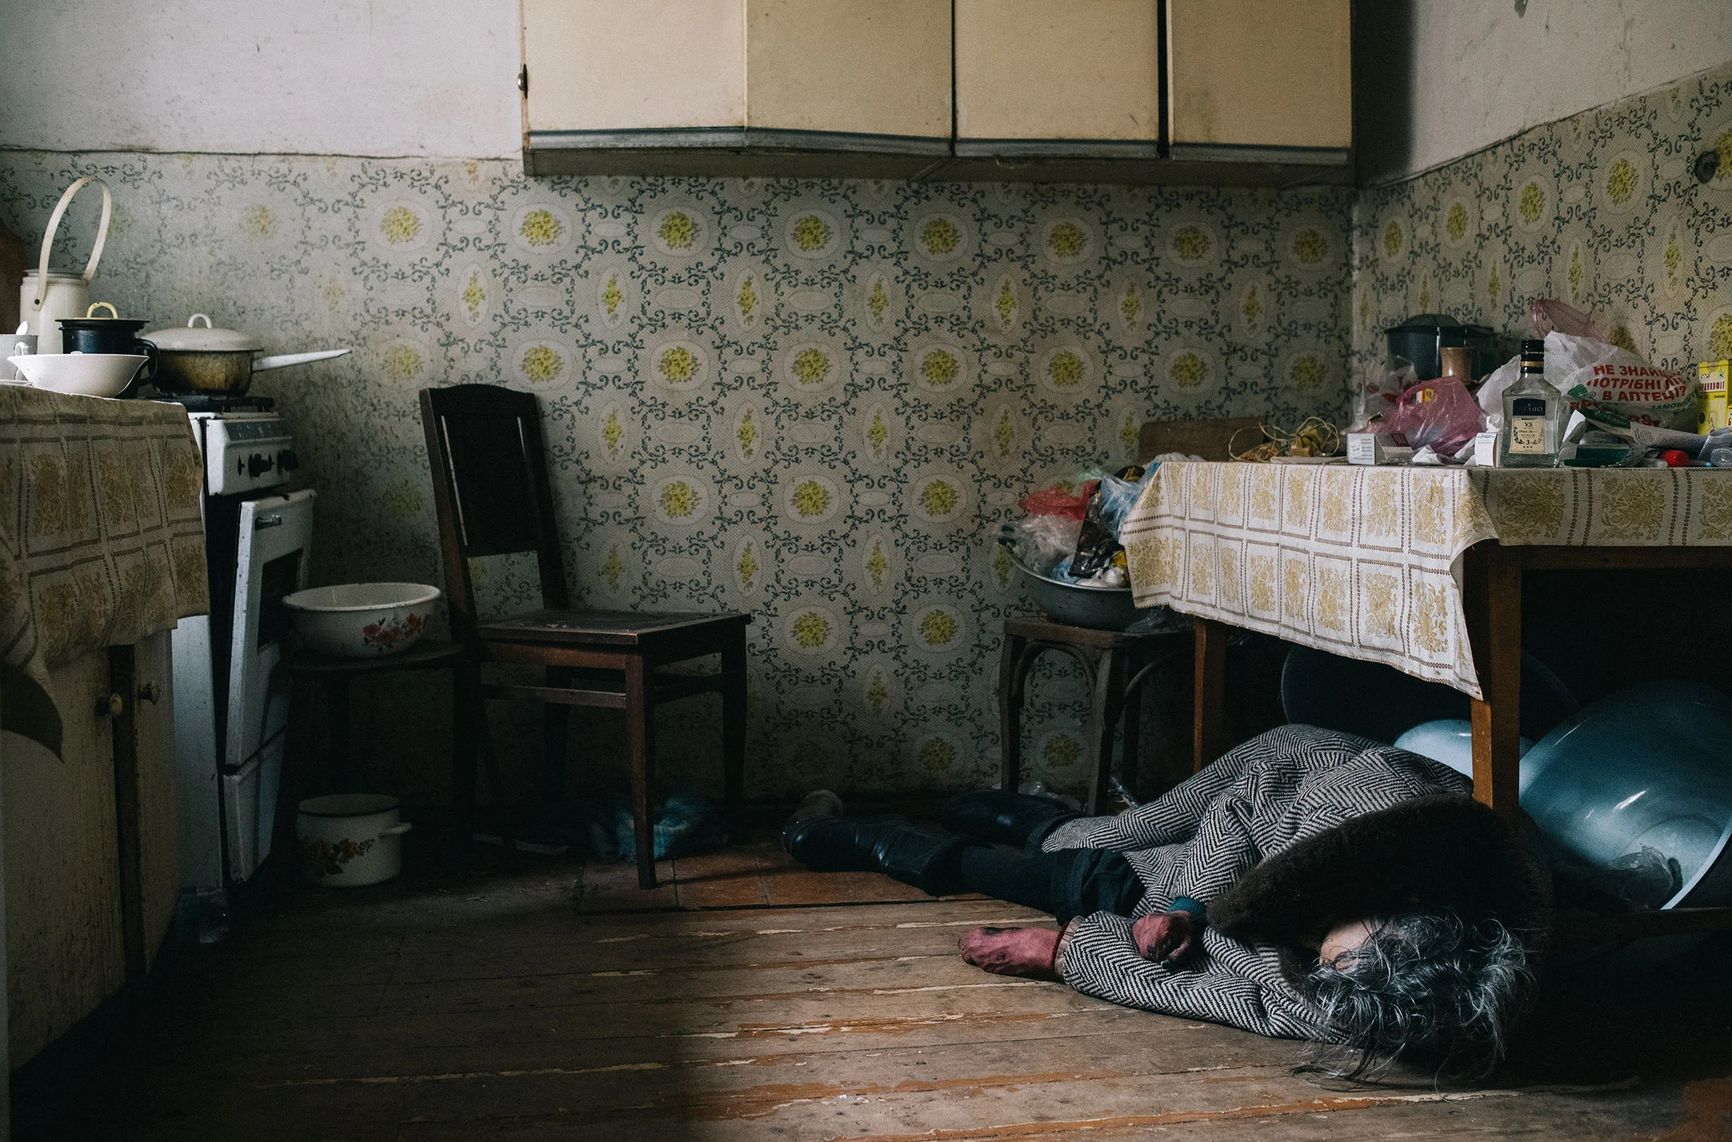 The victim of a mortar attack in Bucha lies in her kitchen on April 6.